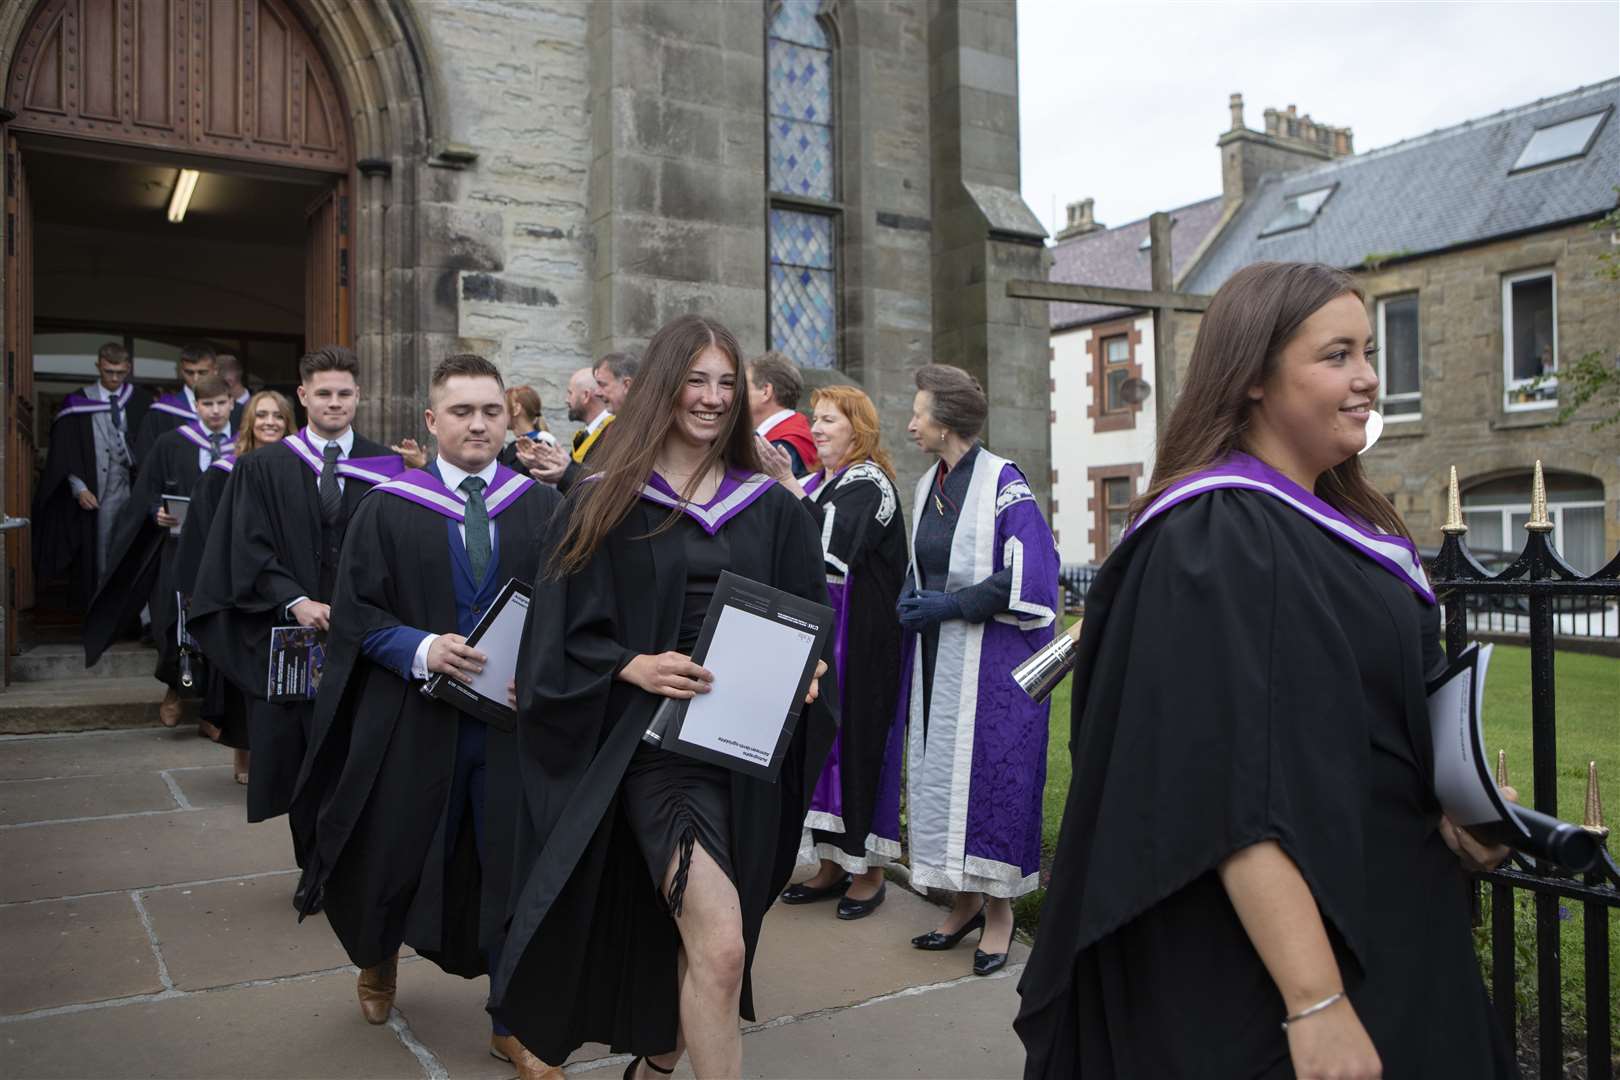 Graduates leaving St Peter's and St Andrew's Church after the ceremony.